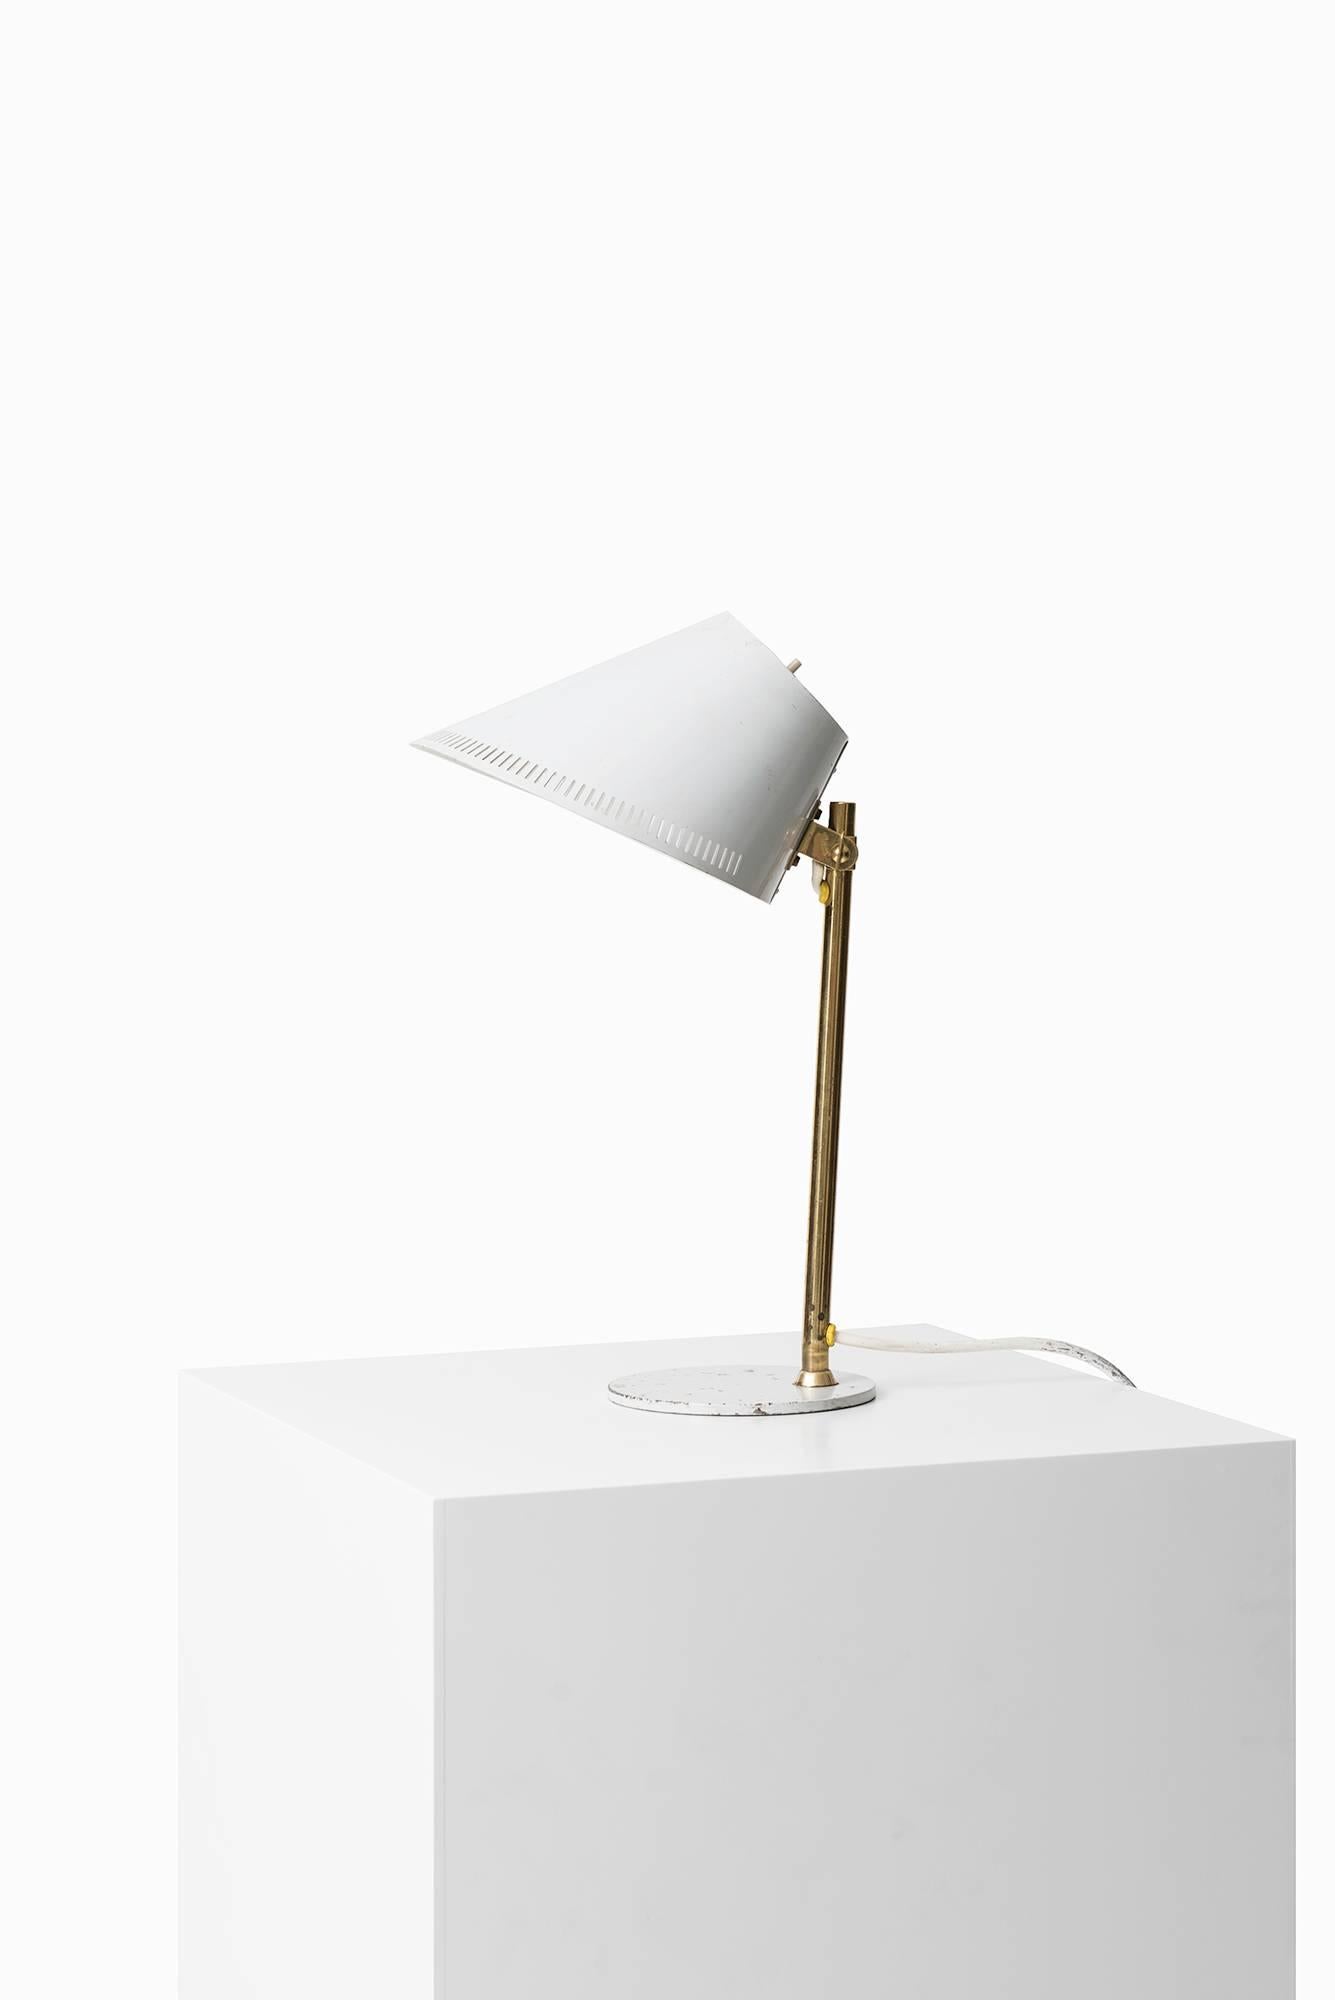 Table lamp model 9227 designed by Paavo Tynell. Produced by Idman in Finland.